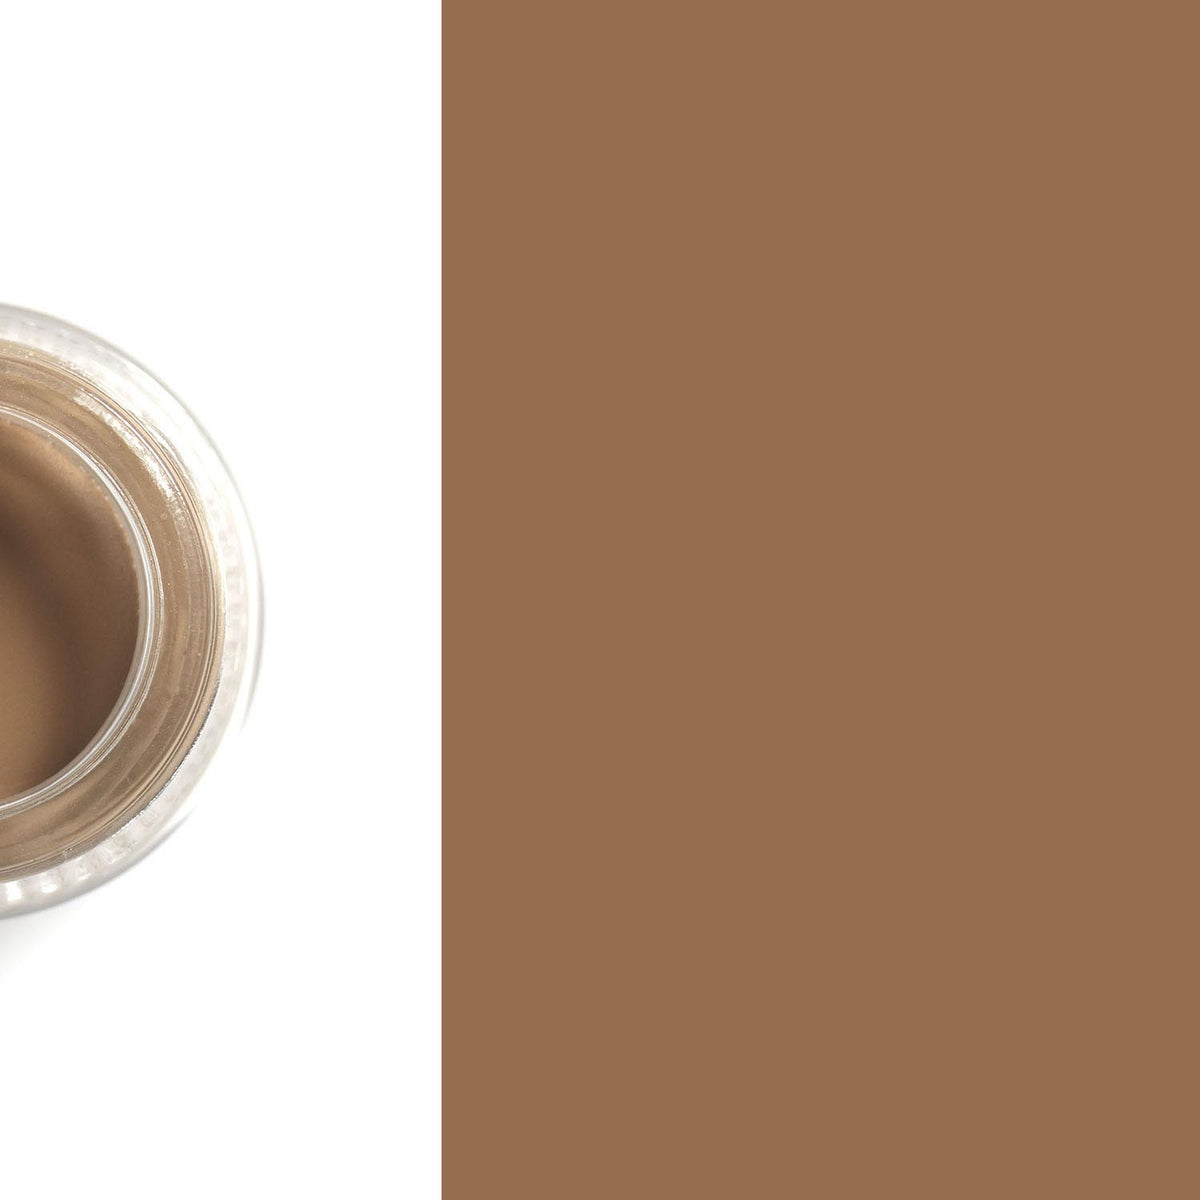 Candy Brow pomade - ALMOND CANDY + Candy BROW Brush